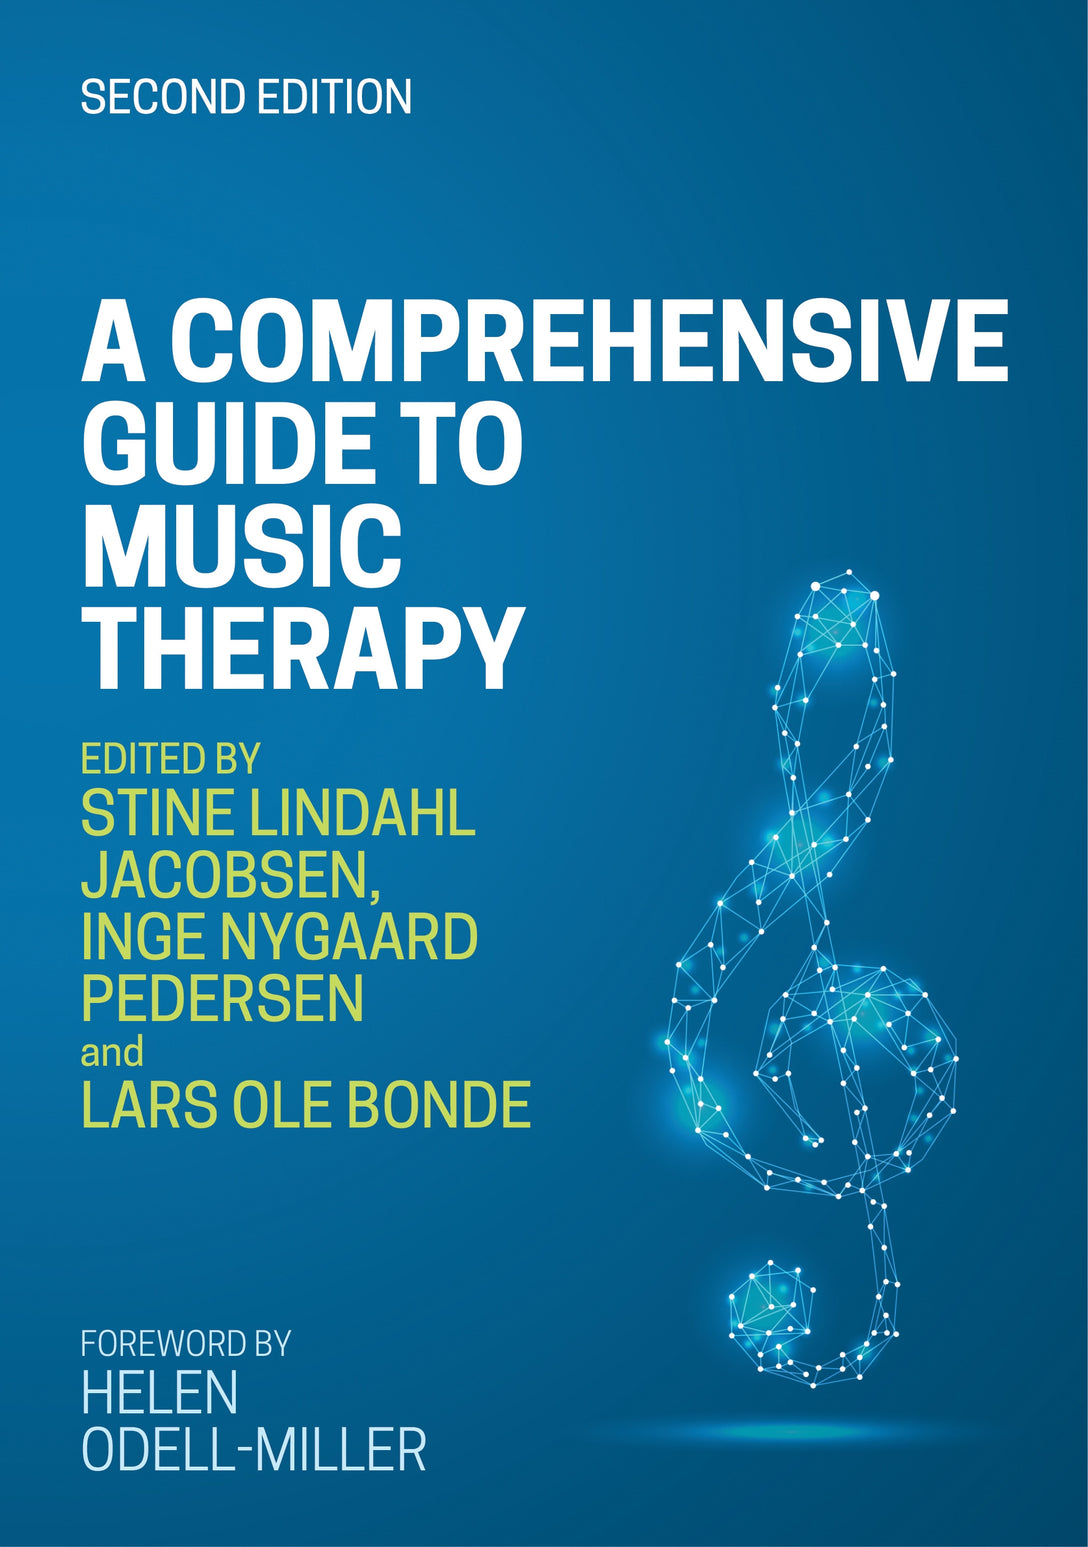 A Comprehensive Guide to Music Therapy, 2nd Edition by Helen Odell-Miller, Inge Nygaard Pedersen, Lars Ole Bonde, Stine Lindahl Jacobsen, No Author Listed